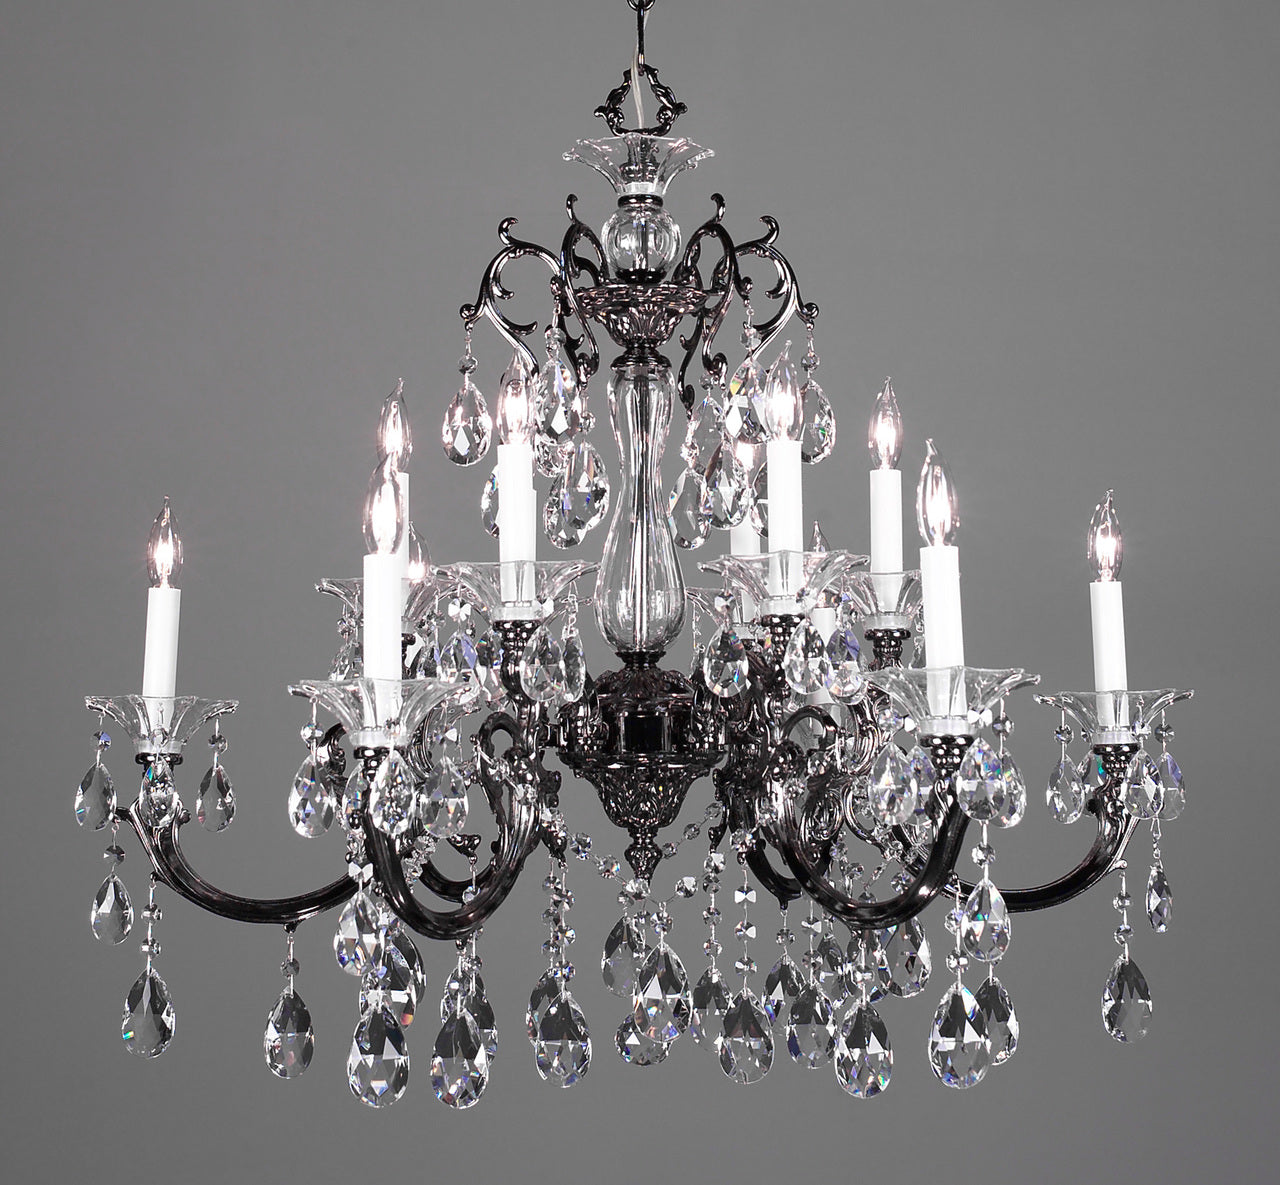 Classic Lighting 57063 CHP S Via Lombardi Crystal Chandelier in Champagne Pearl (Imported from Spain)